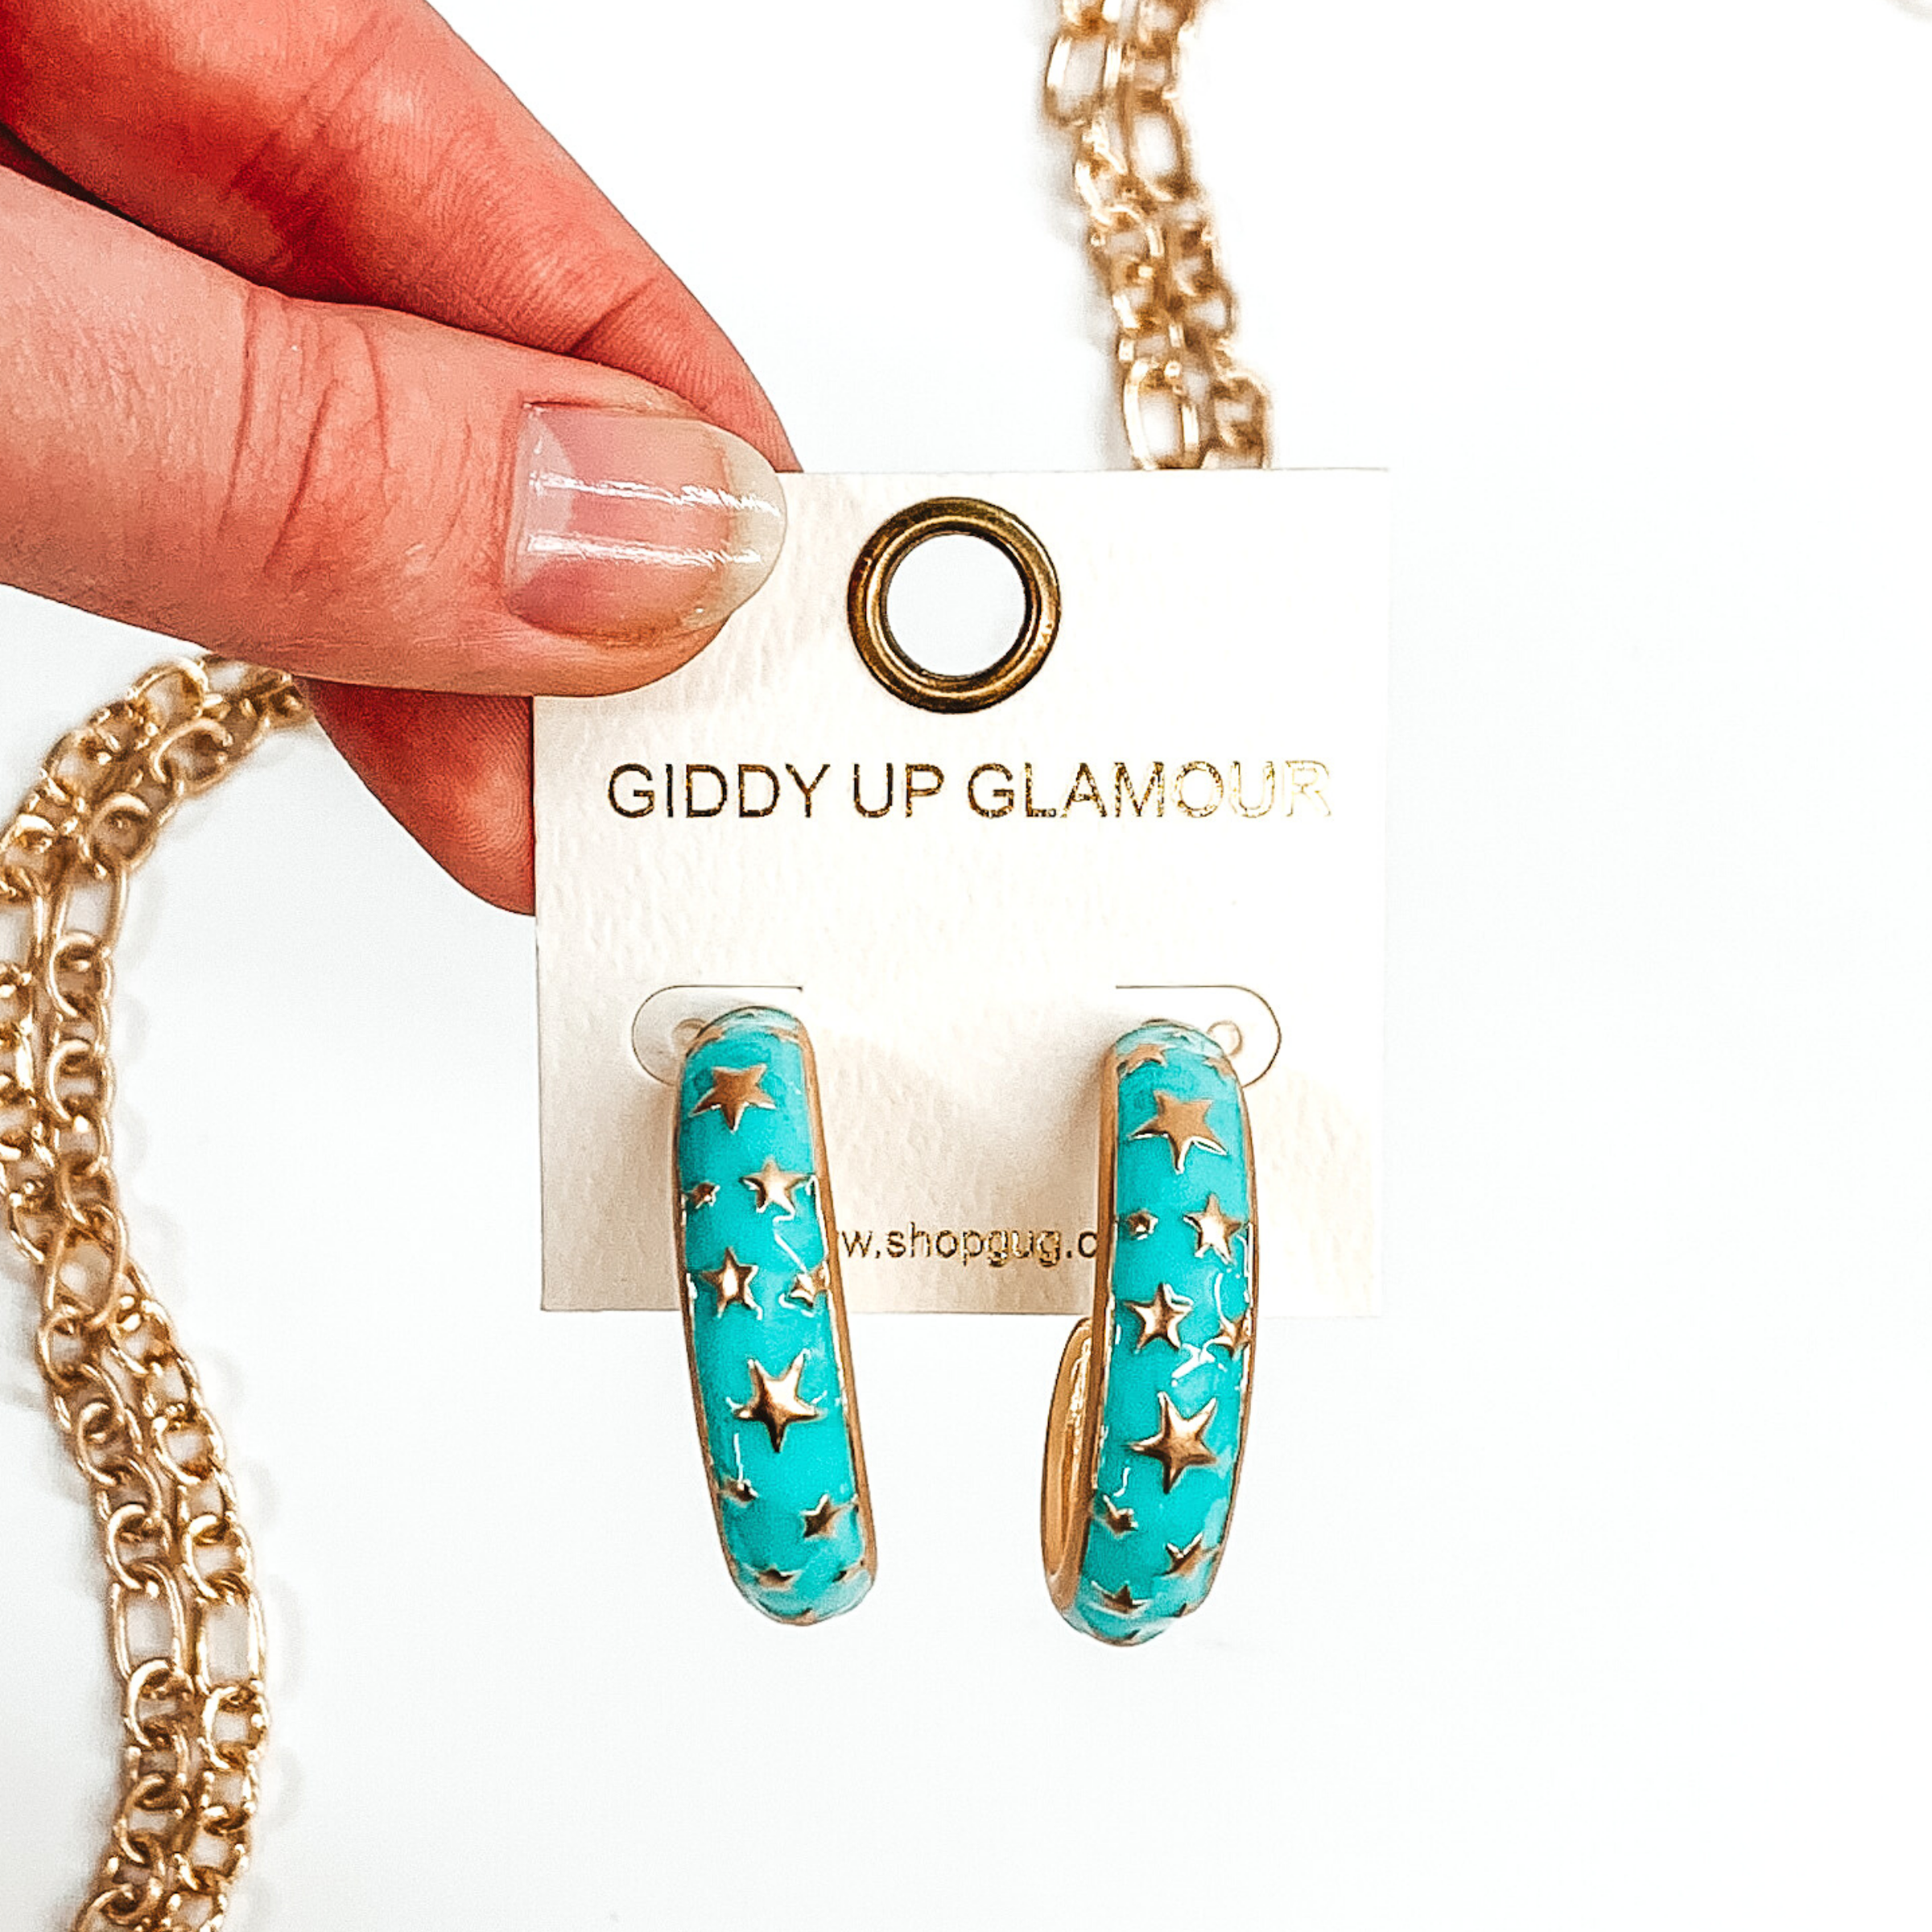 Thick, rounded light blue hoop earrings with gold outlined and gold star pattern. These earrings are on a white earring holder held by fingers on a white background that has gold chained decor. 